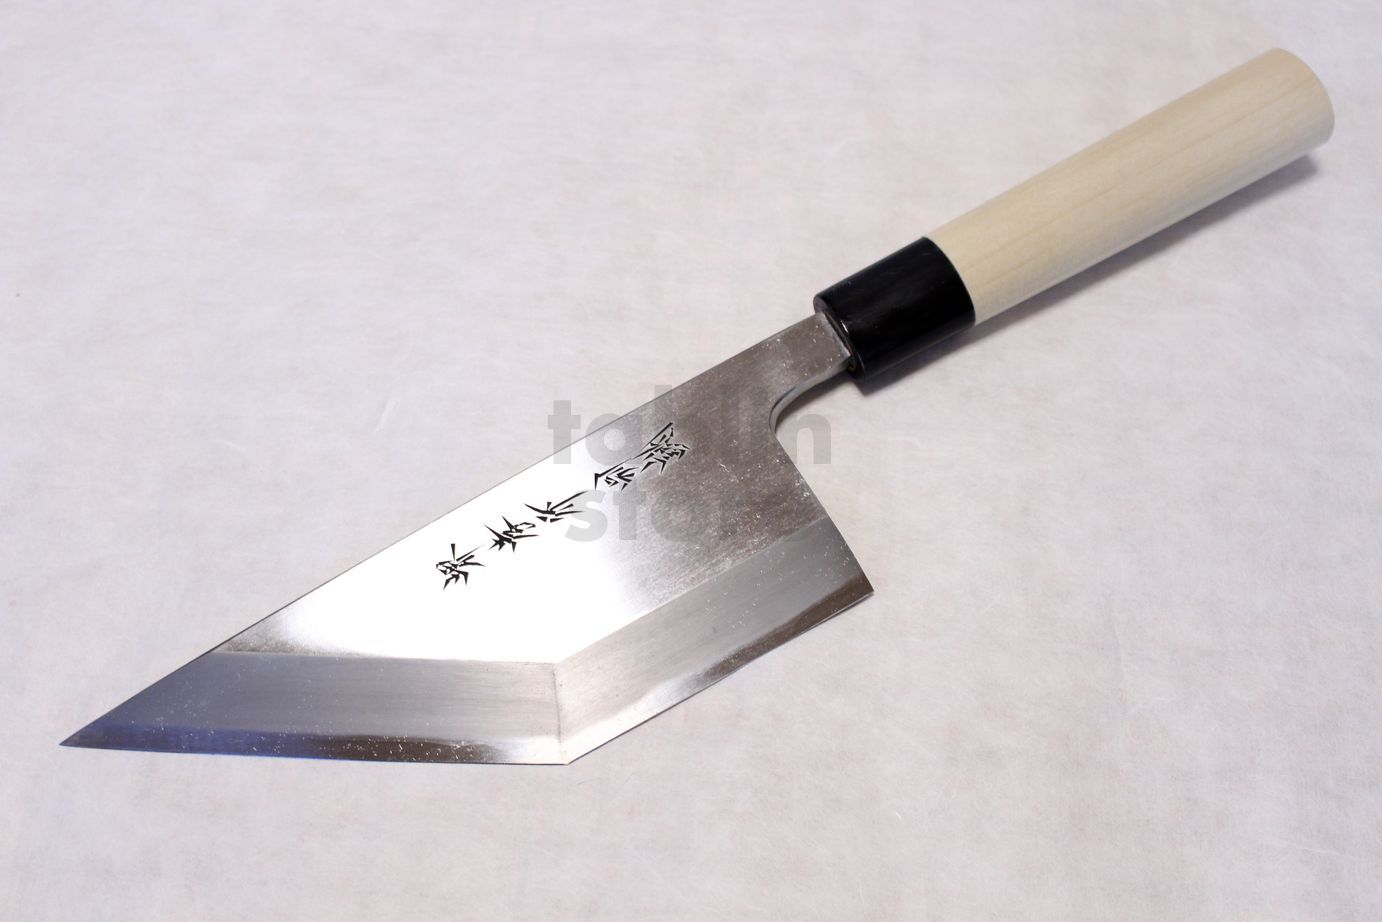 KOTAI Cleaver Knife 190 Mm Blade Hand Forged Japanese 440C Steel 